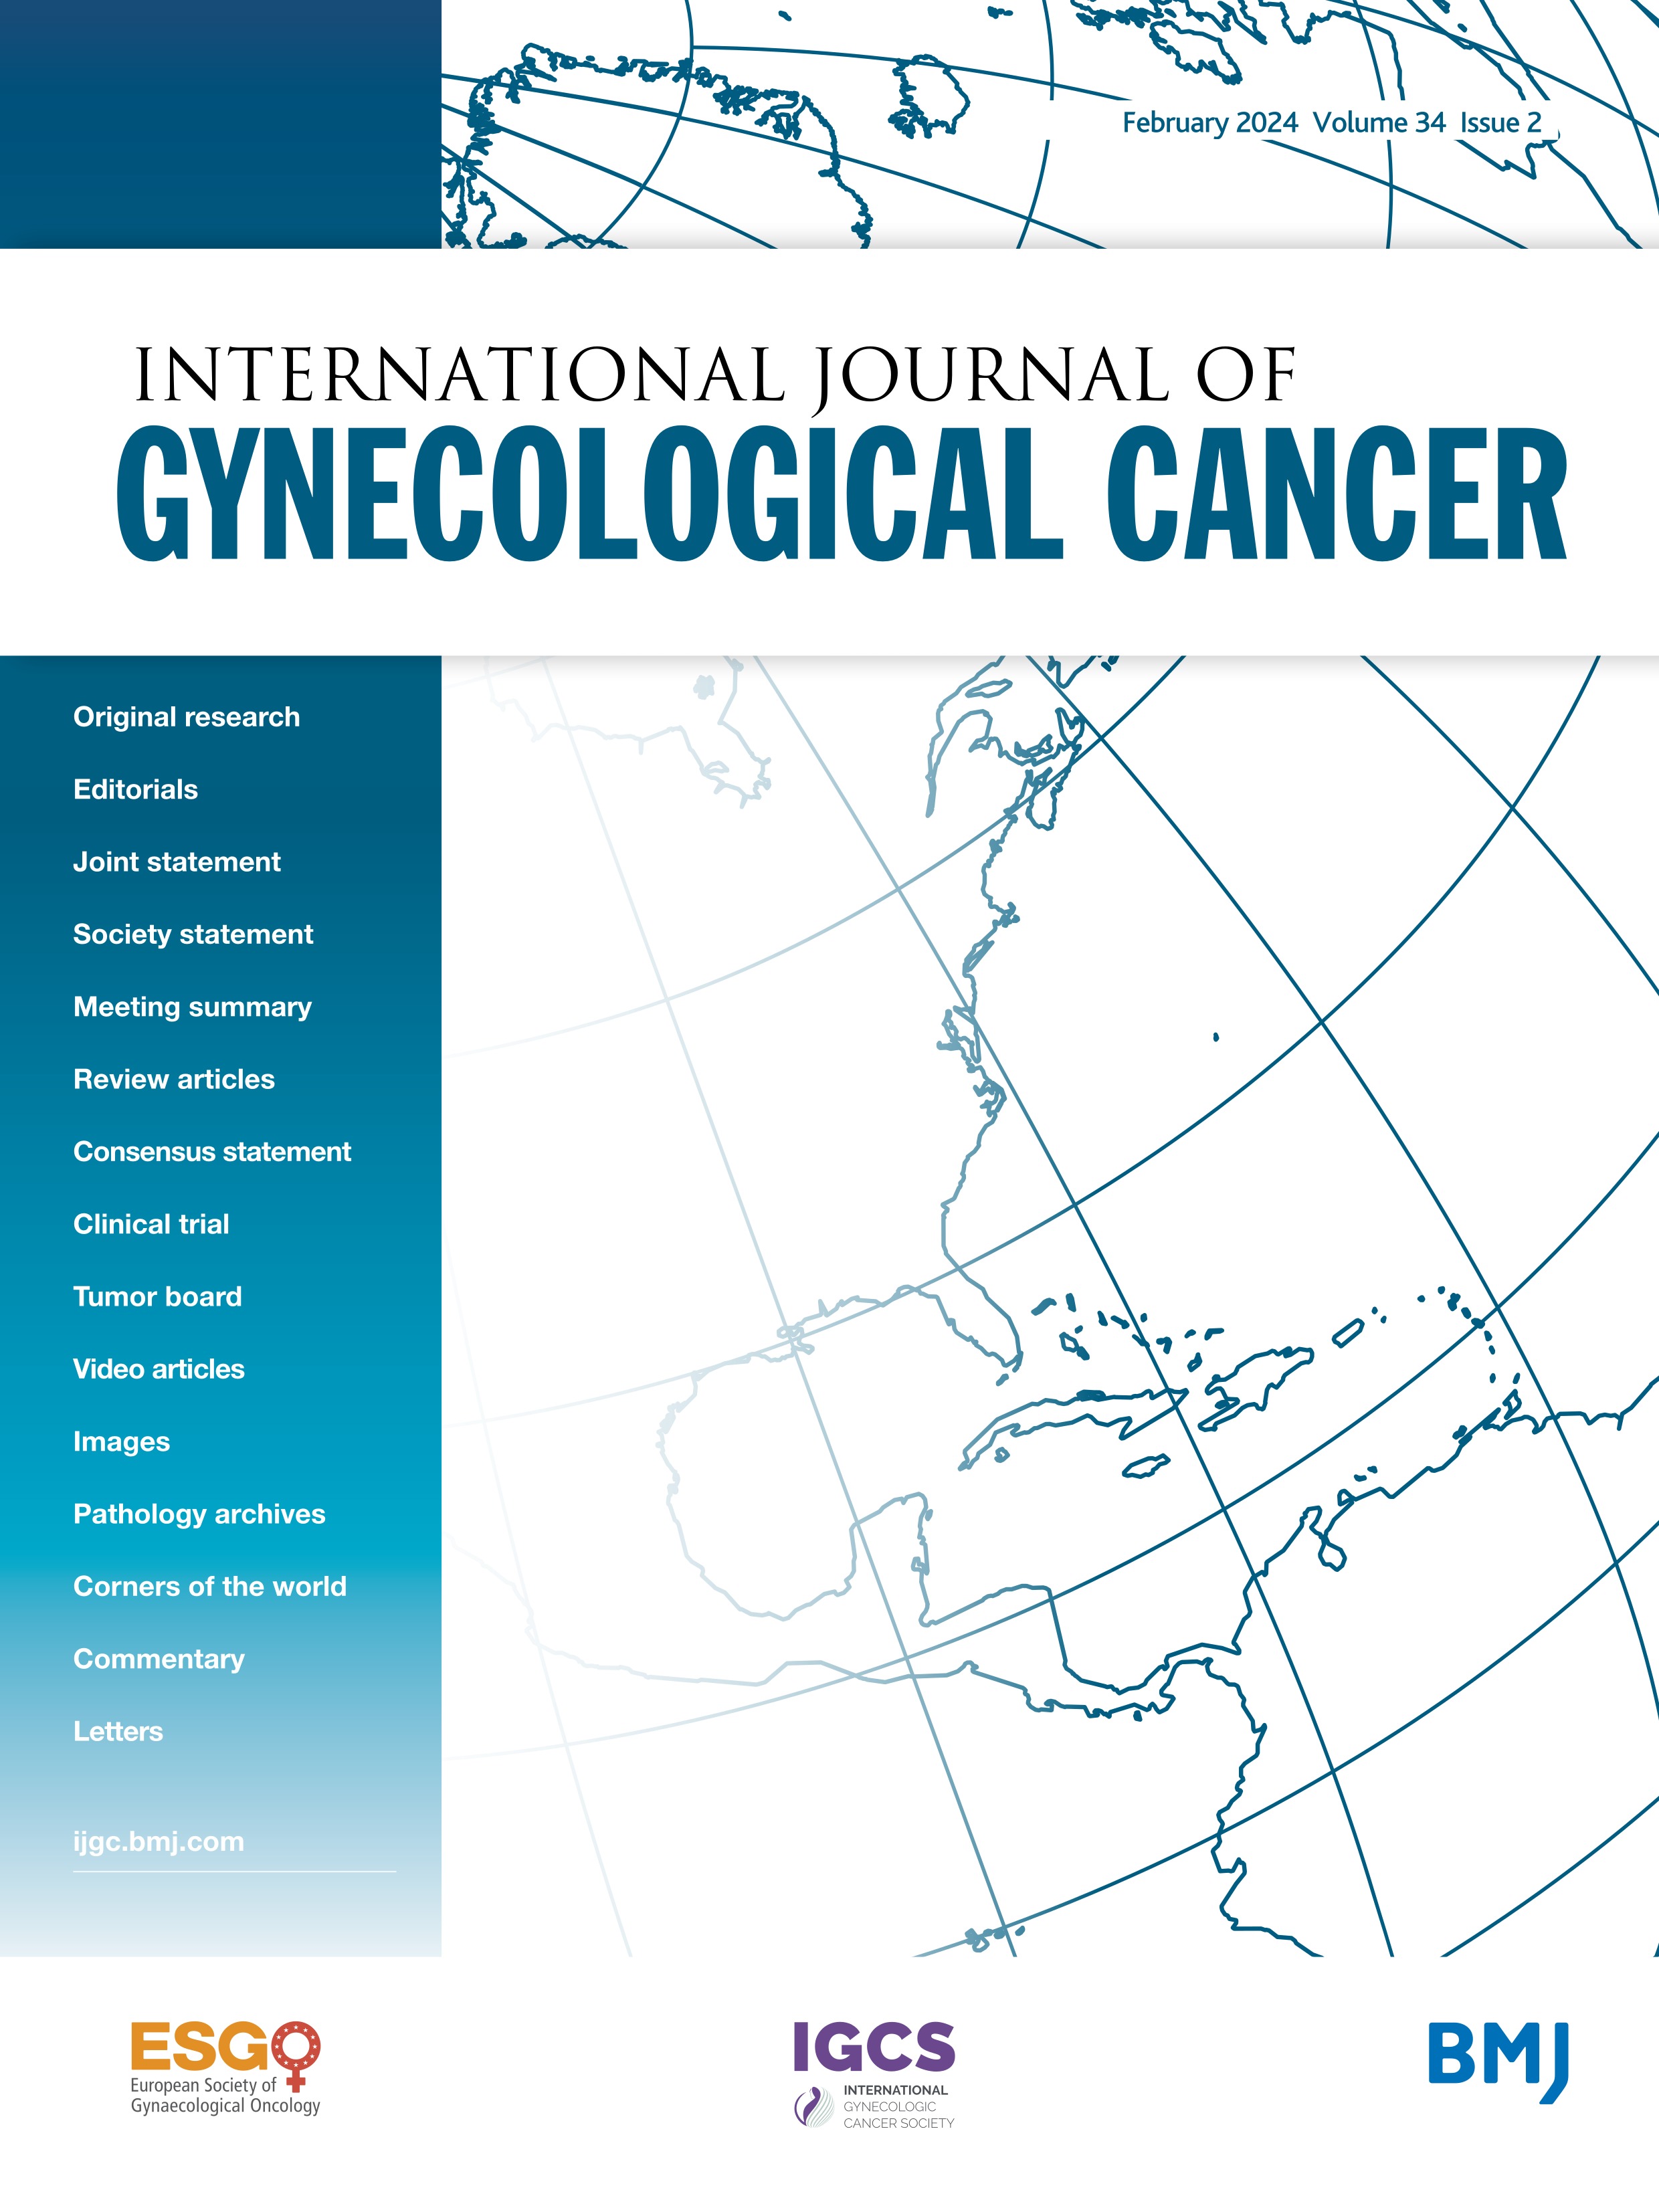 Clinicopathological characteristics of multiple-classifier endometrial cancers: a cohort study and systematic review